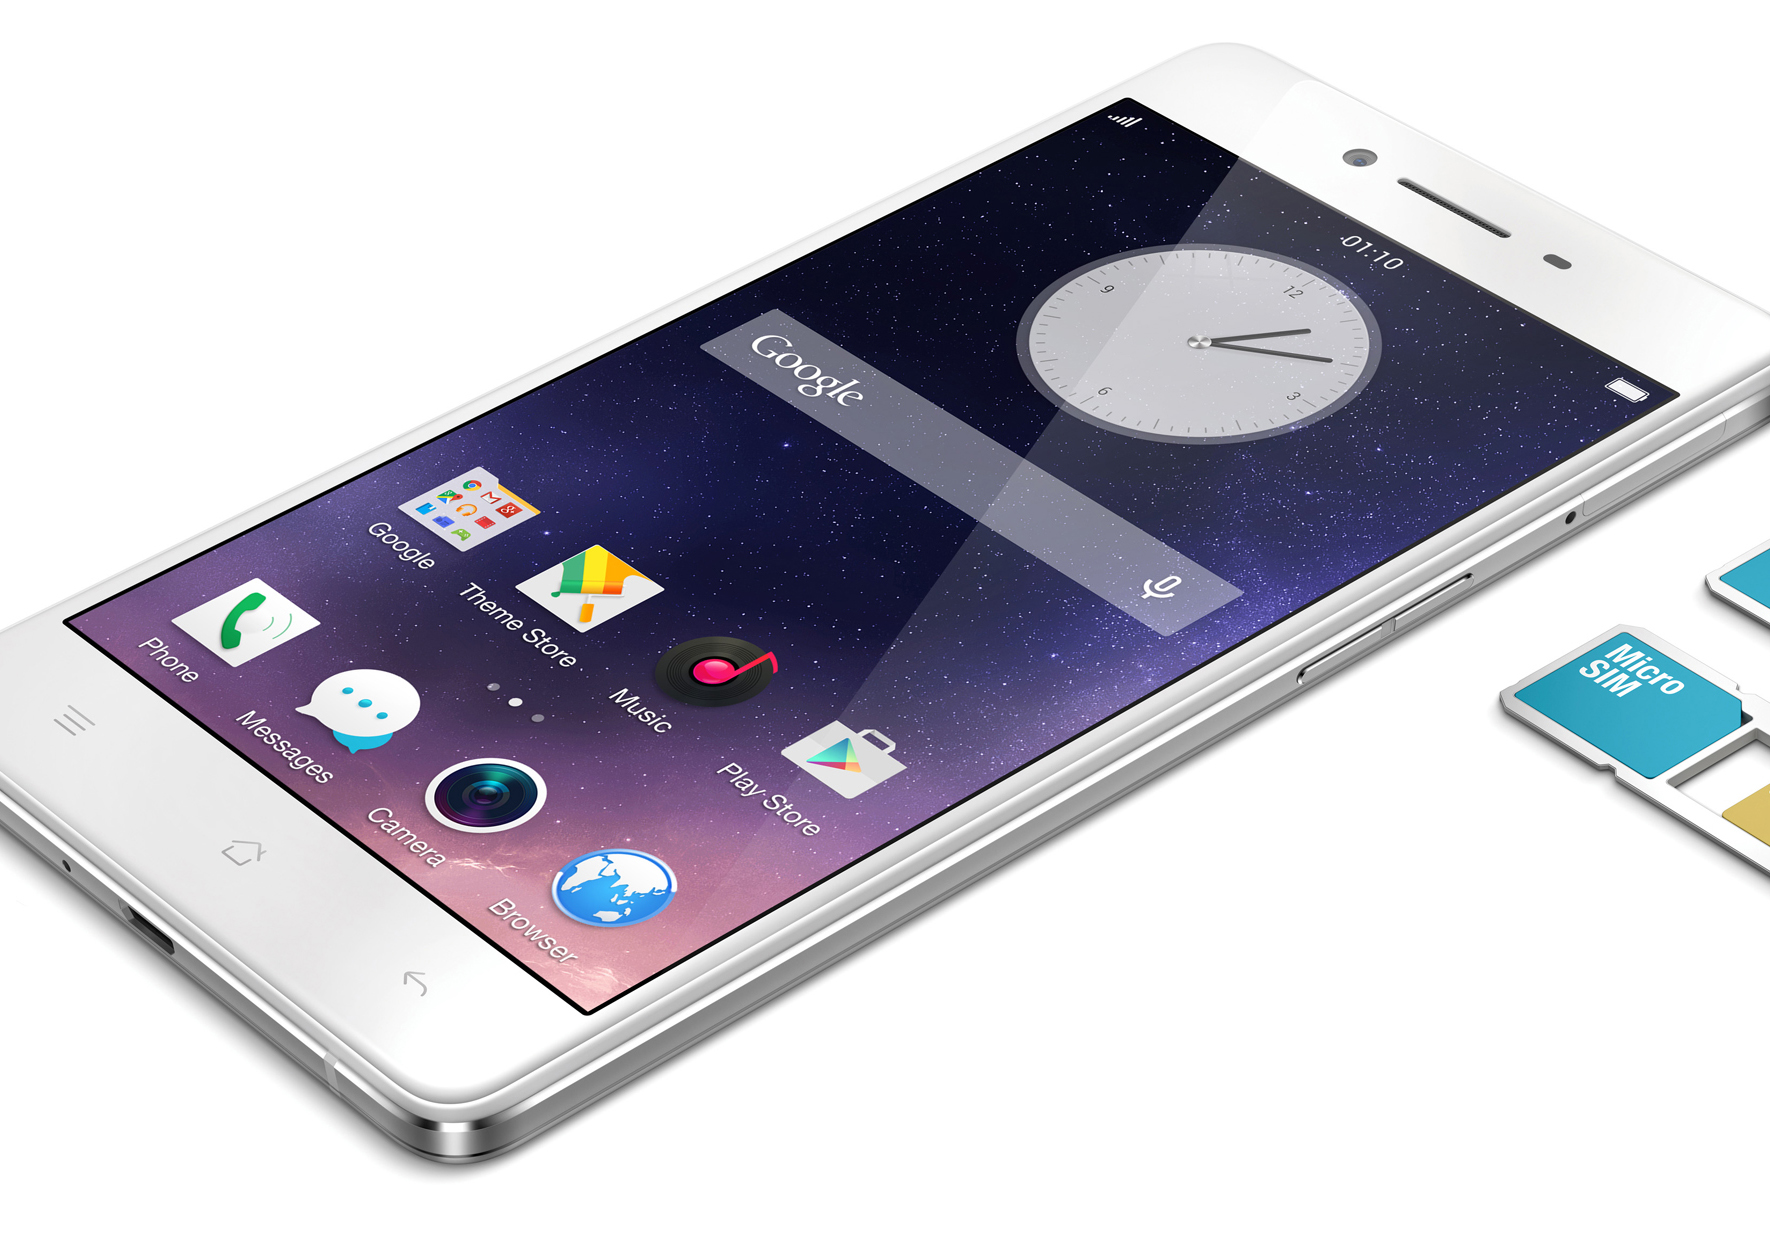 Oppo R7s Android Phone Review - AdamFowlerIT.com